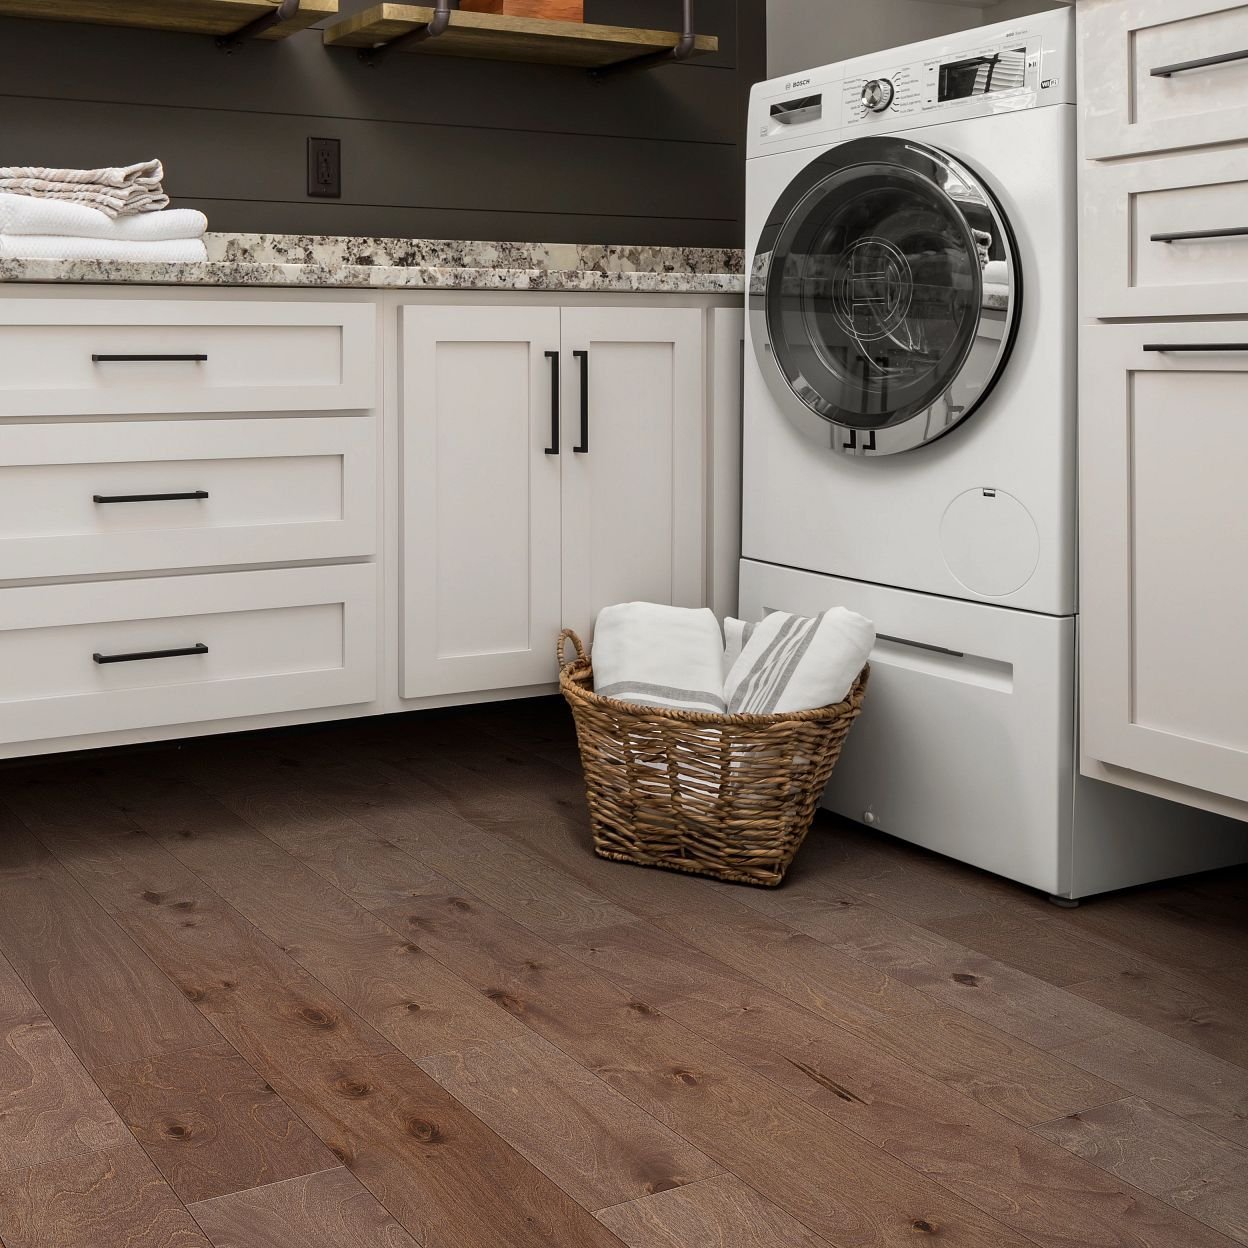 Solid Vs Engineered Hardwood In A Laundry Room from Specialty Shoppe Floors and More Inc in Fort Morg